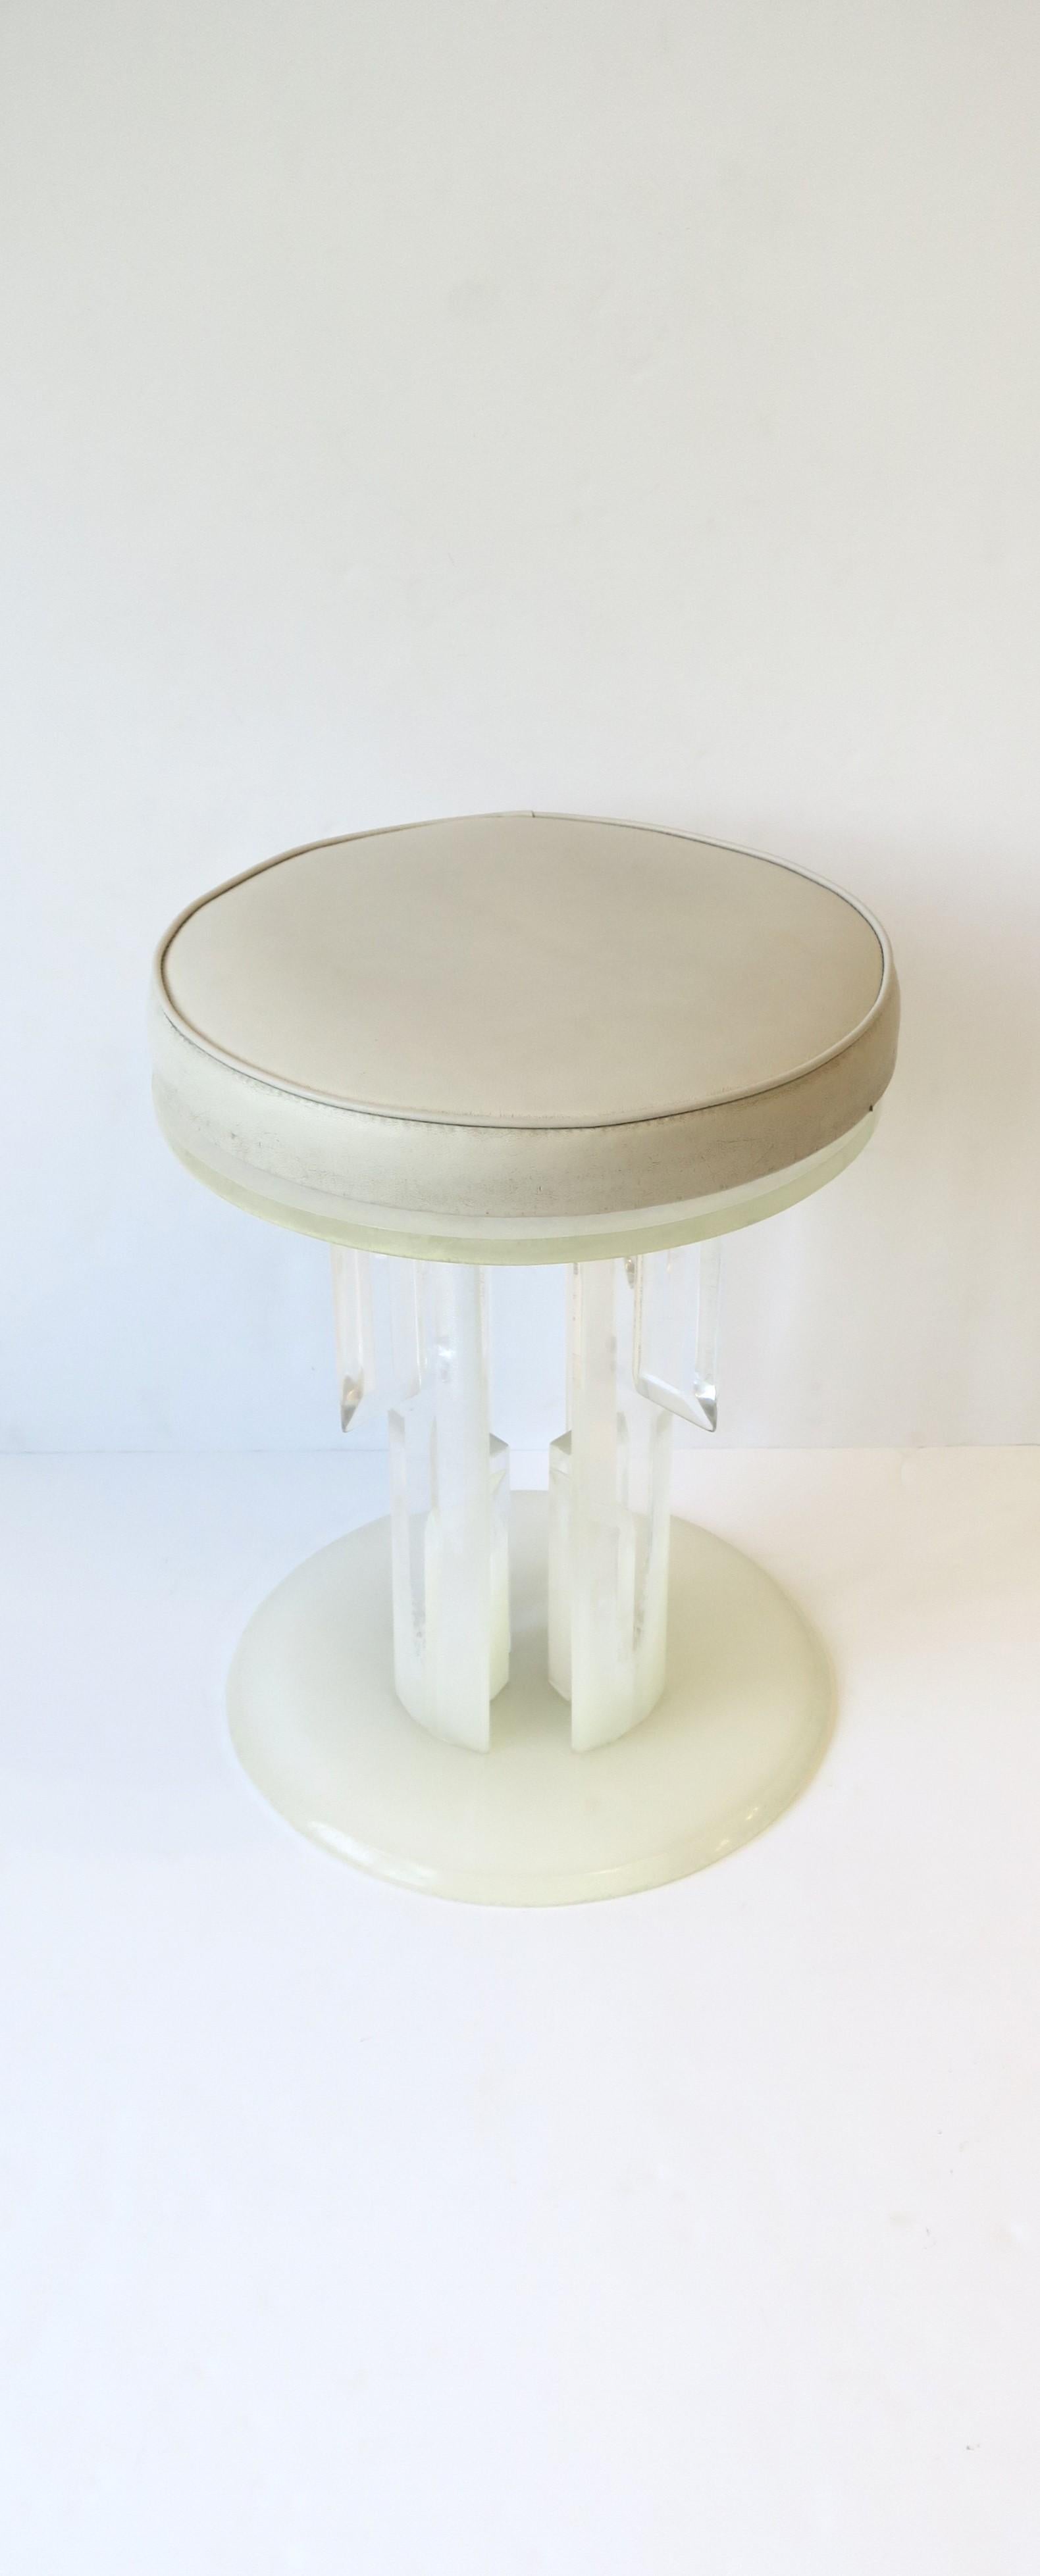 A Lucite swivel stool or vanity seat, circa 1960s - 1970s, 20th century, USA. This round swivel stool has an upholstered pleather seat cushion and a Deco/Hollywood Regency decorative Lucite base. Seat cushion can be removed for reupholstery if so